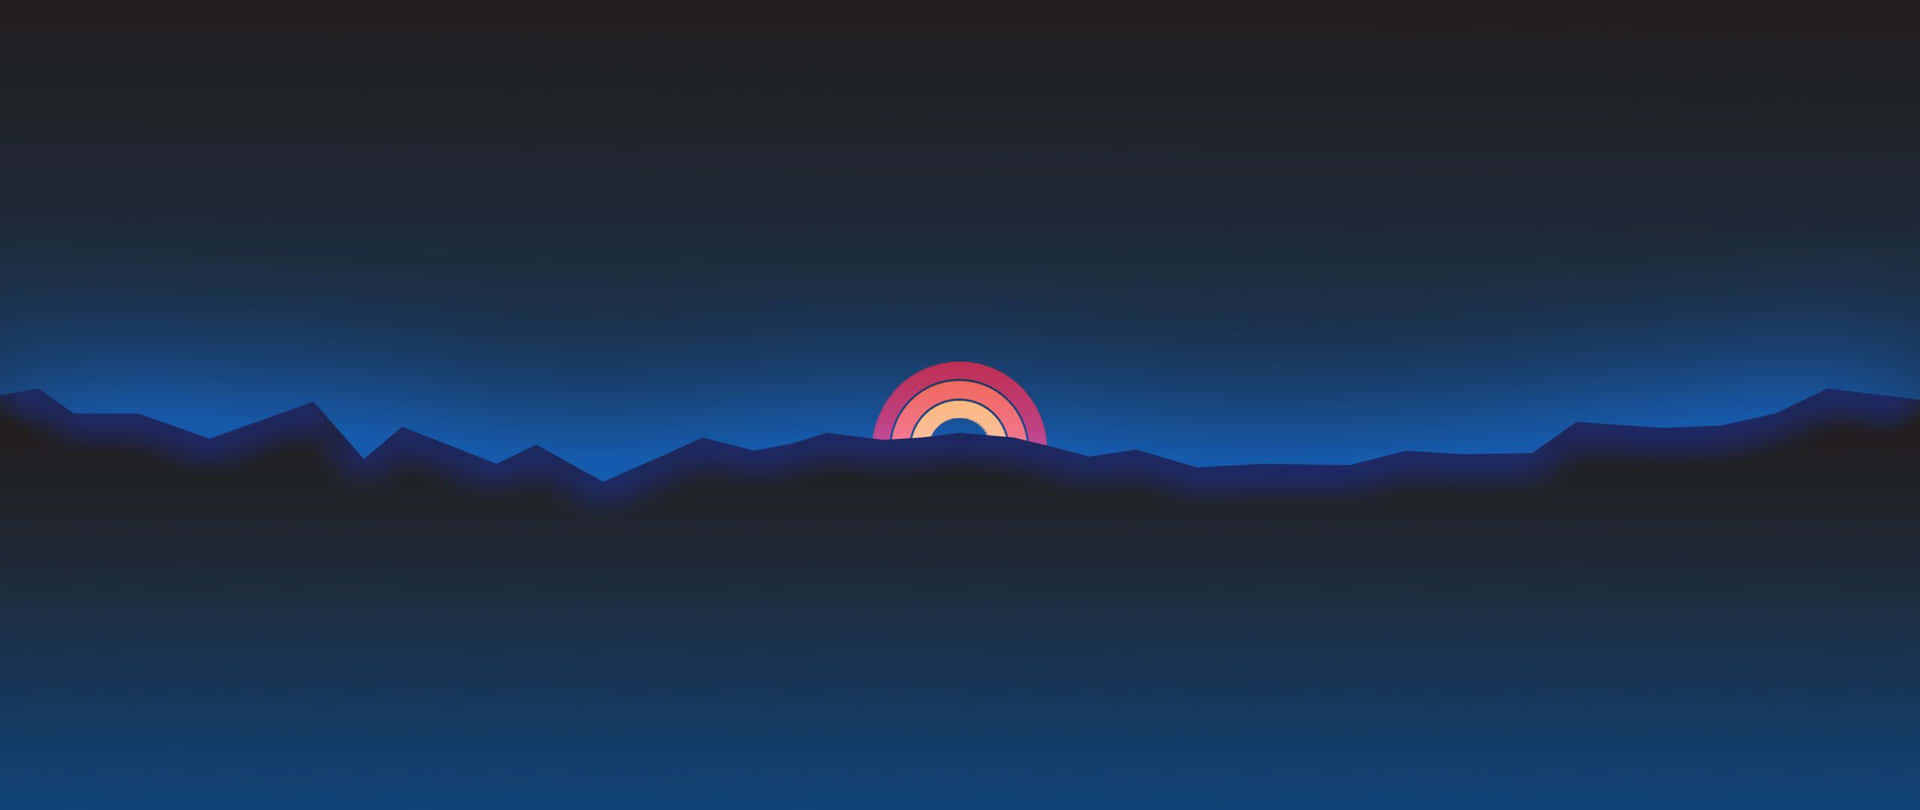 Lost in the beauty of the Retro Sunset Wallpaper